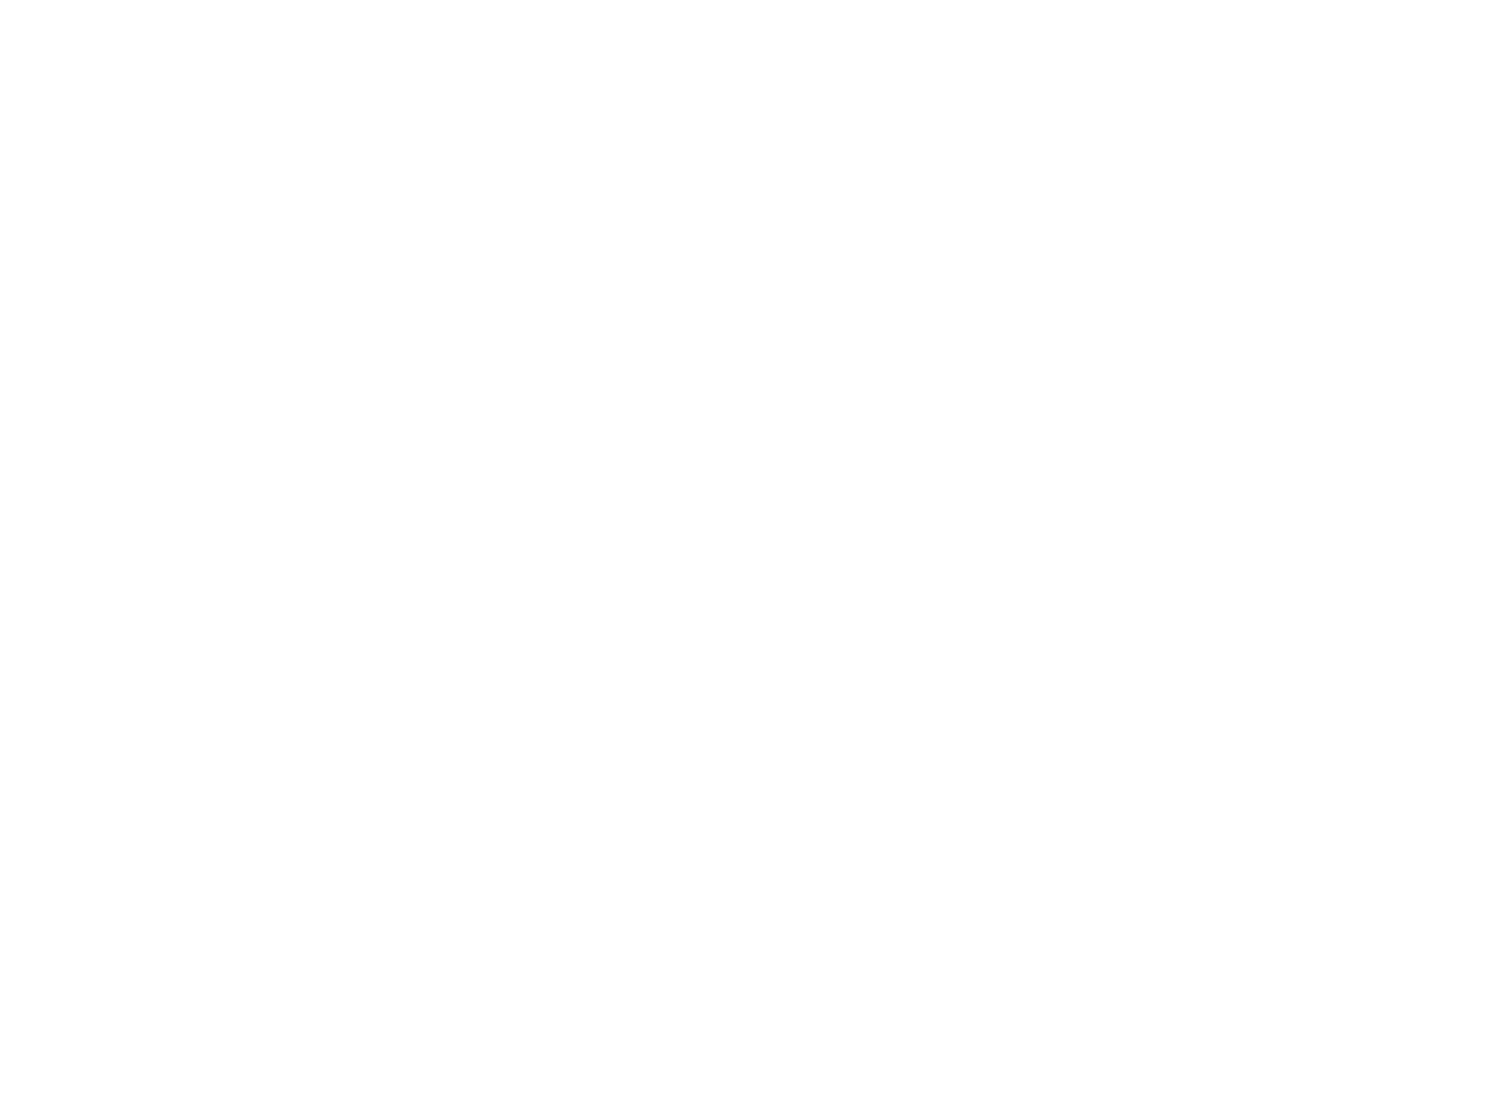 Keys for Success Music Therapy